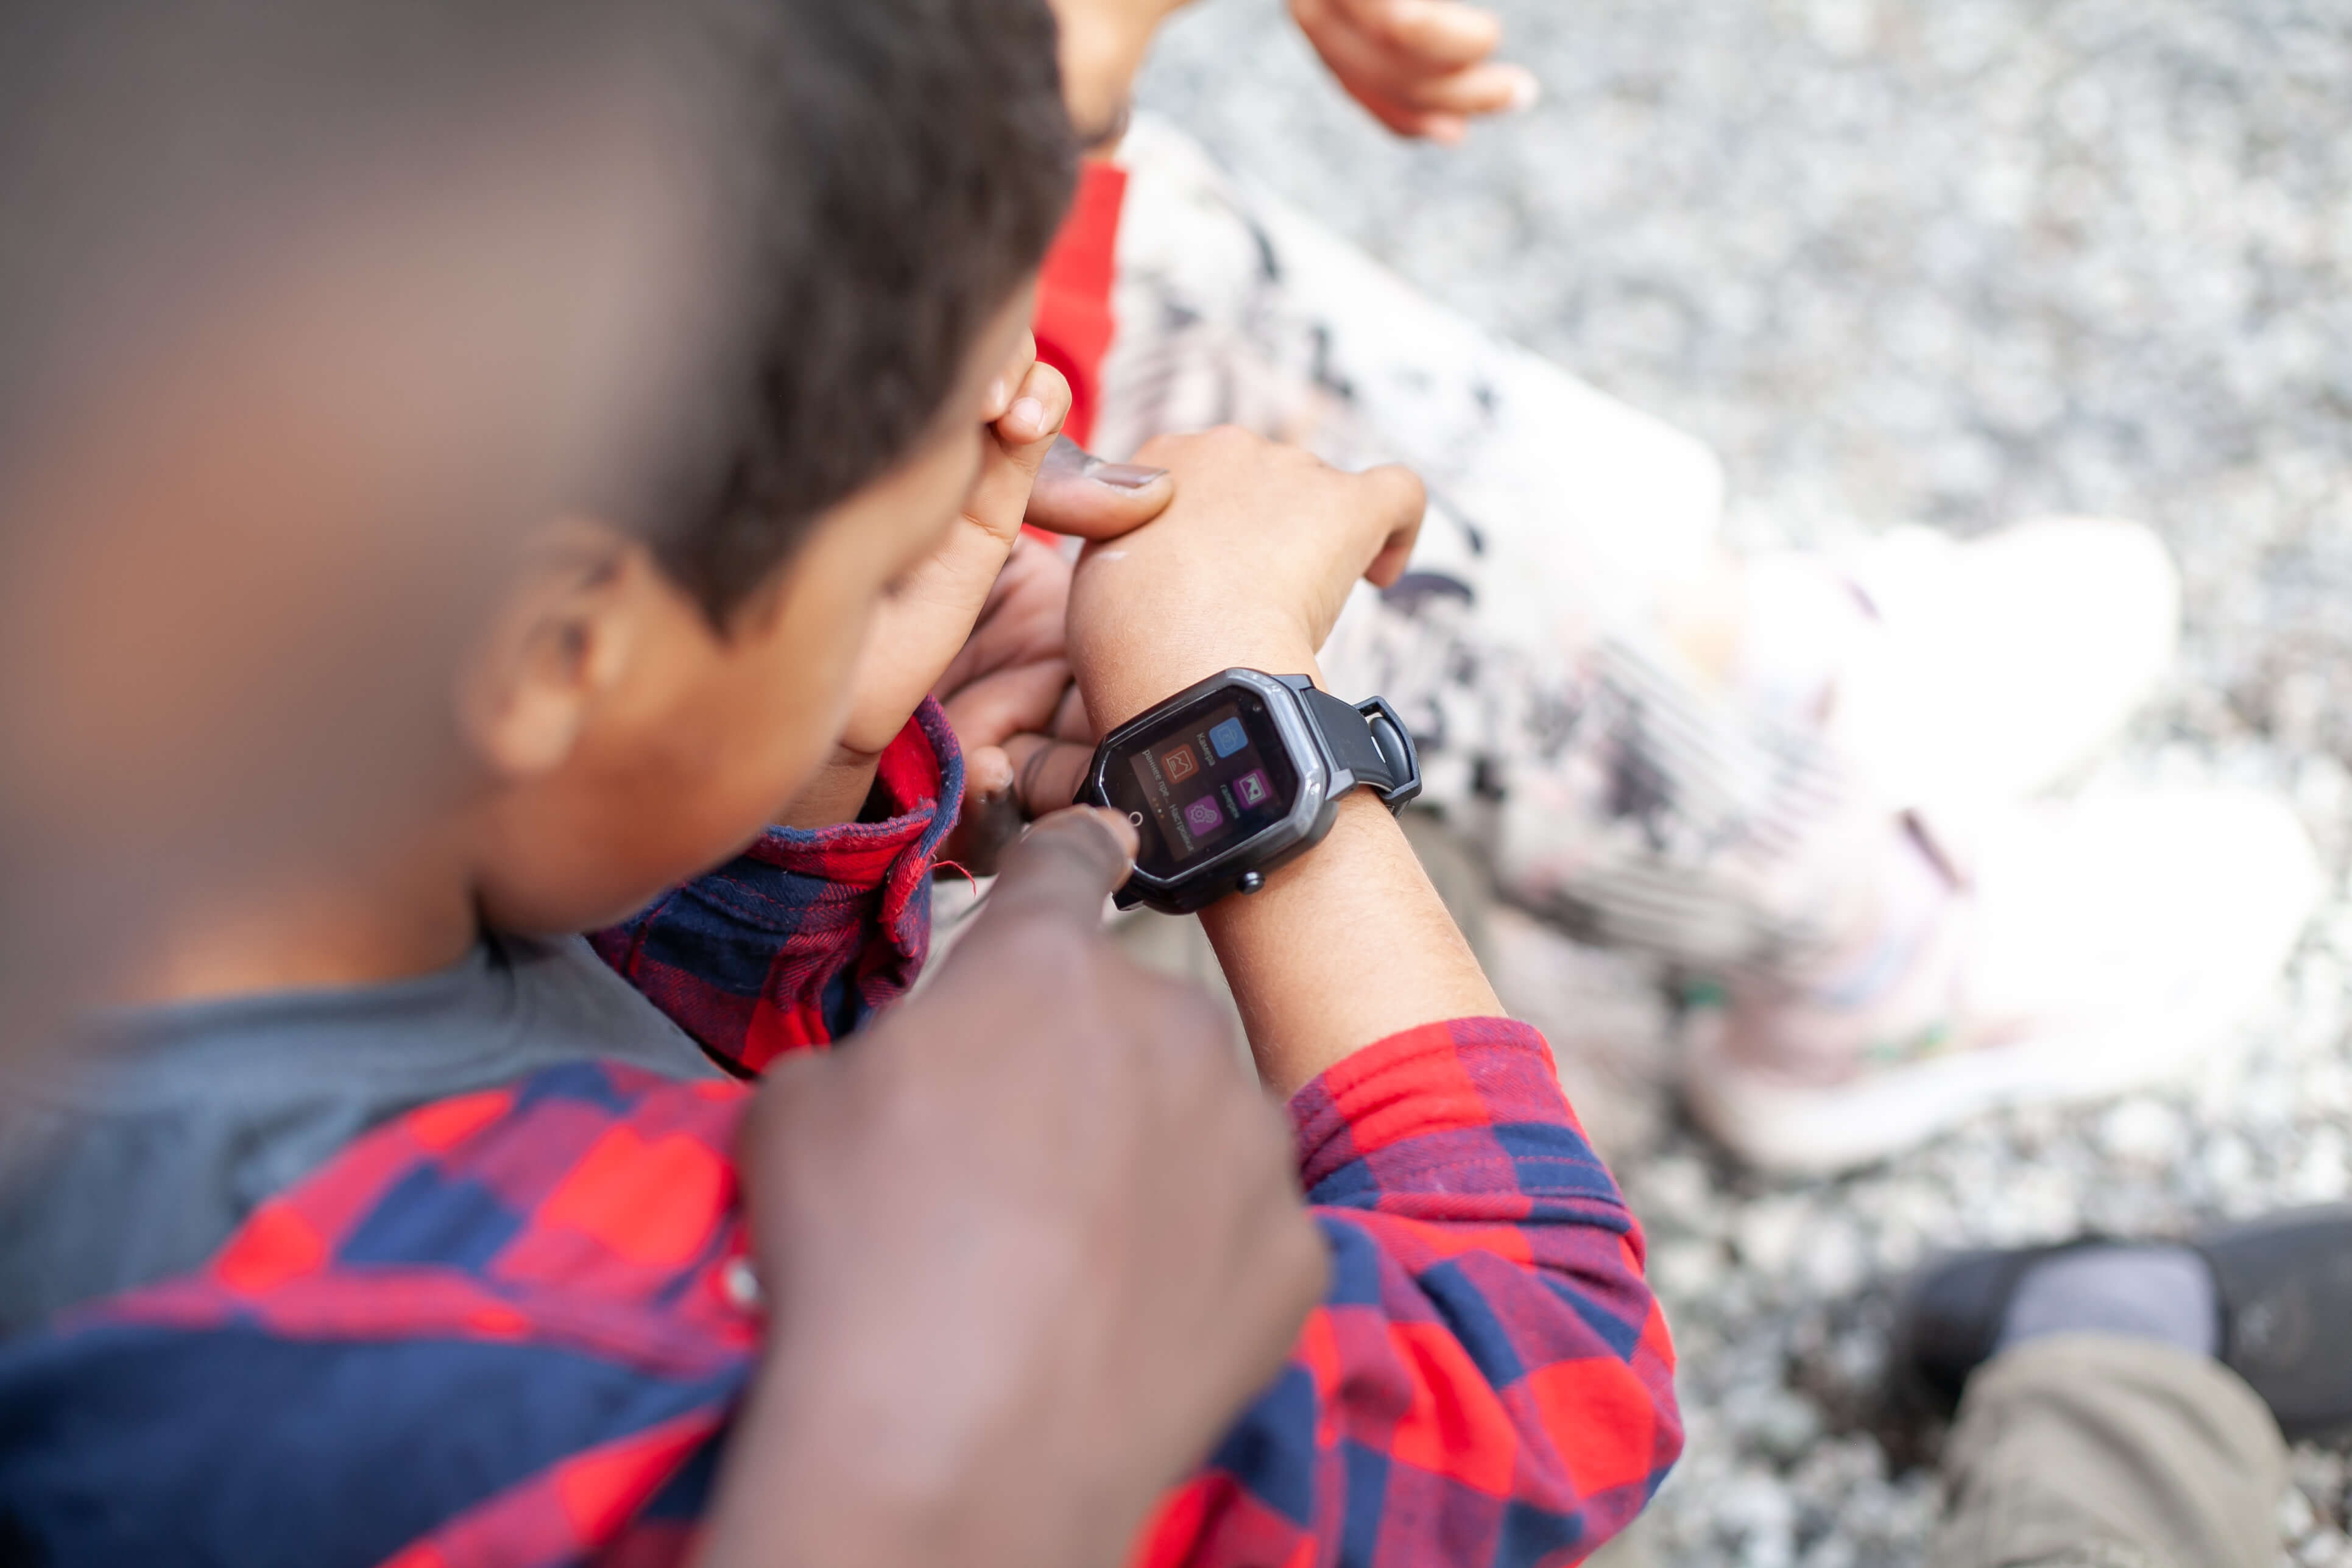 vegne henvise Lamme How to Set Up a Kid's Watch: Change Time, Sync, Reset Settings | FindMyKids